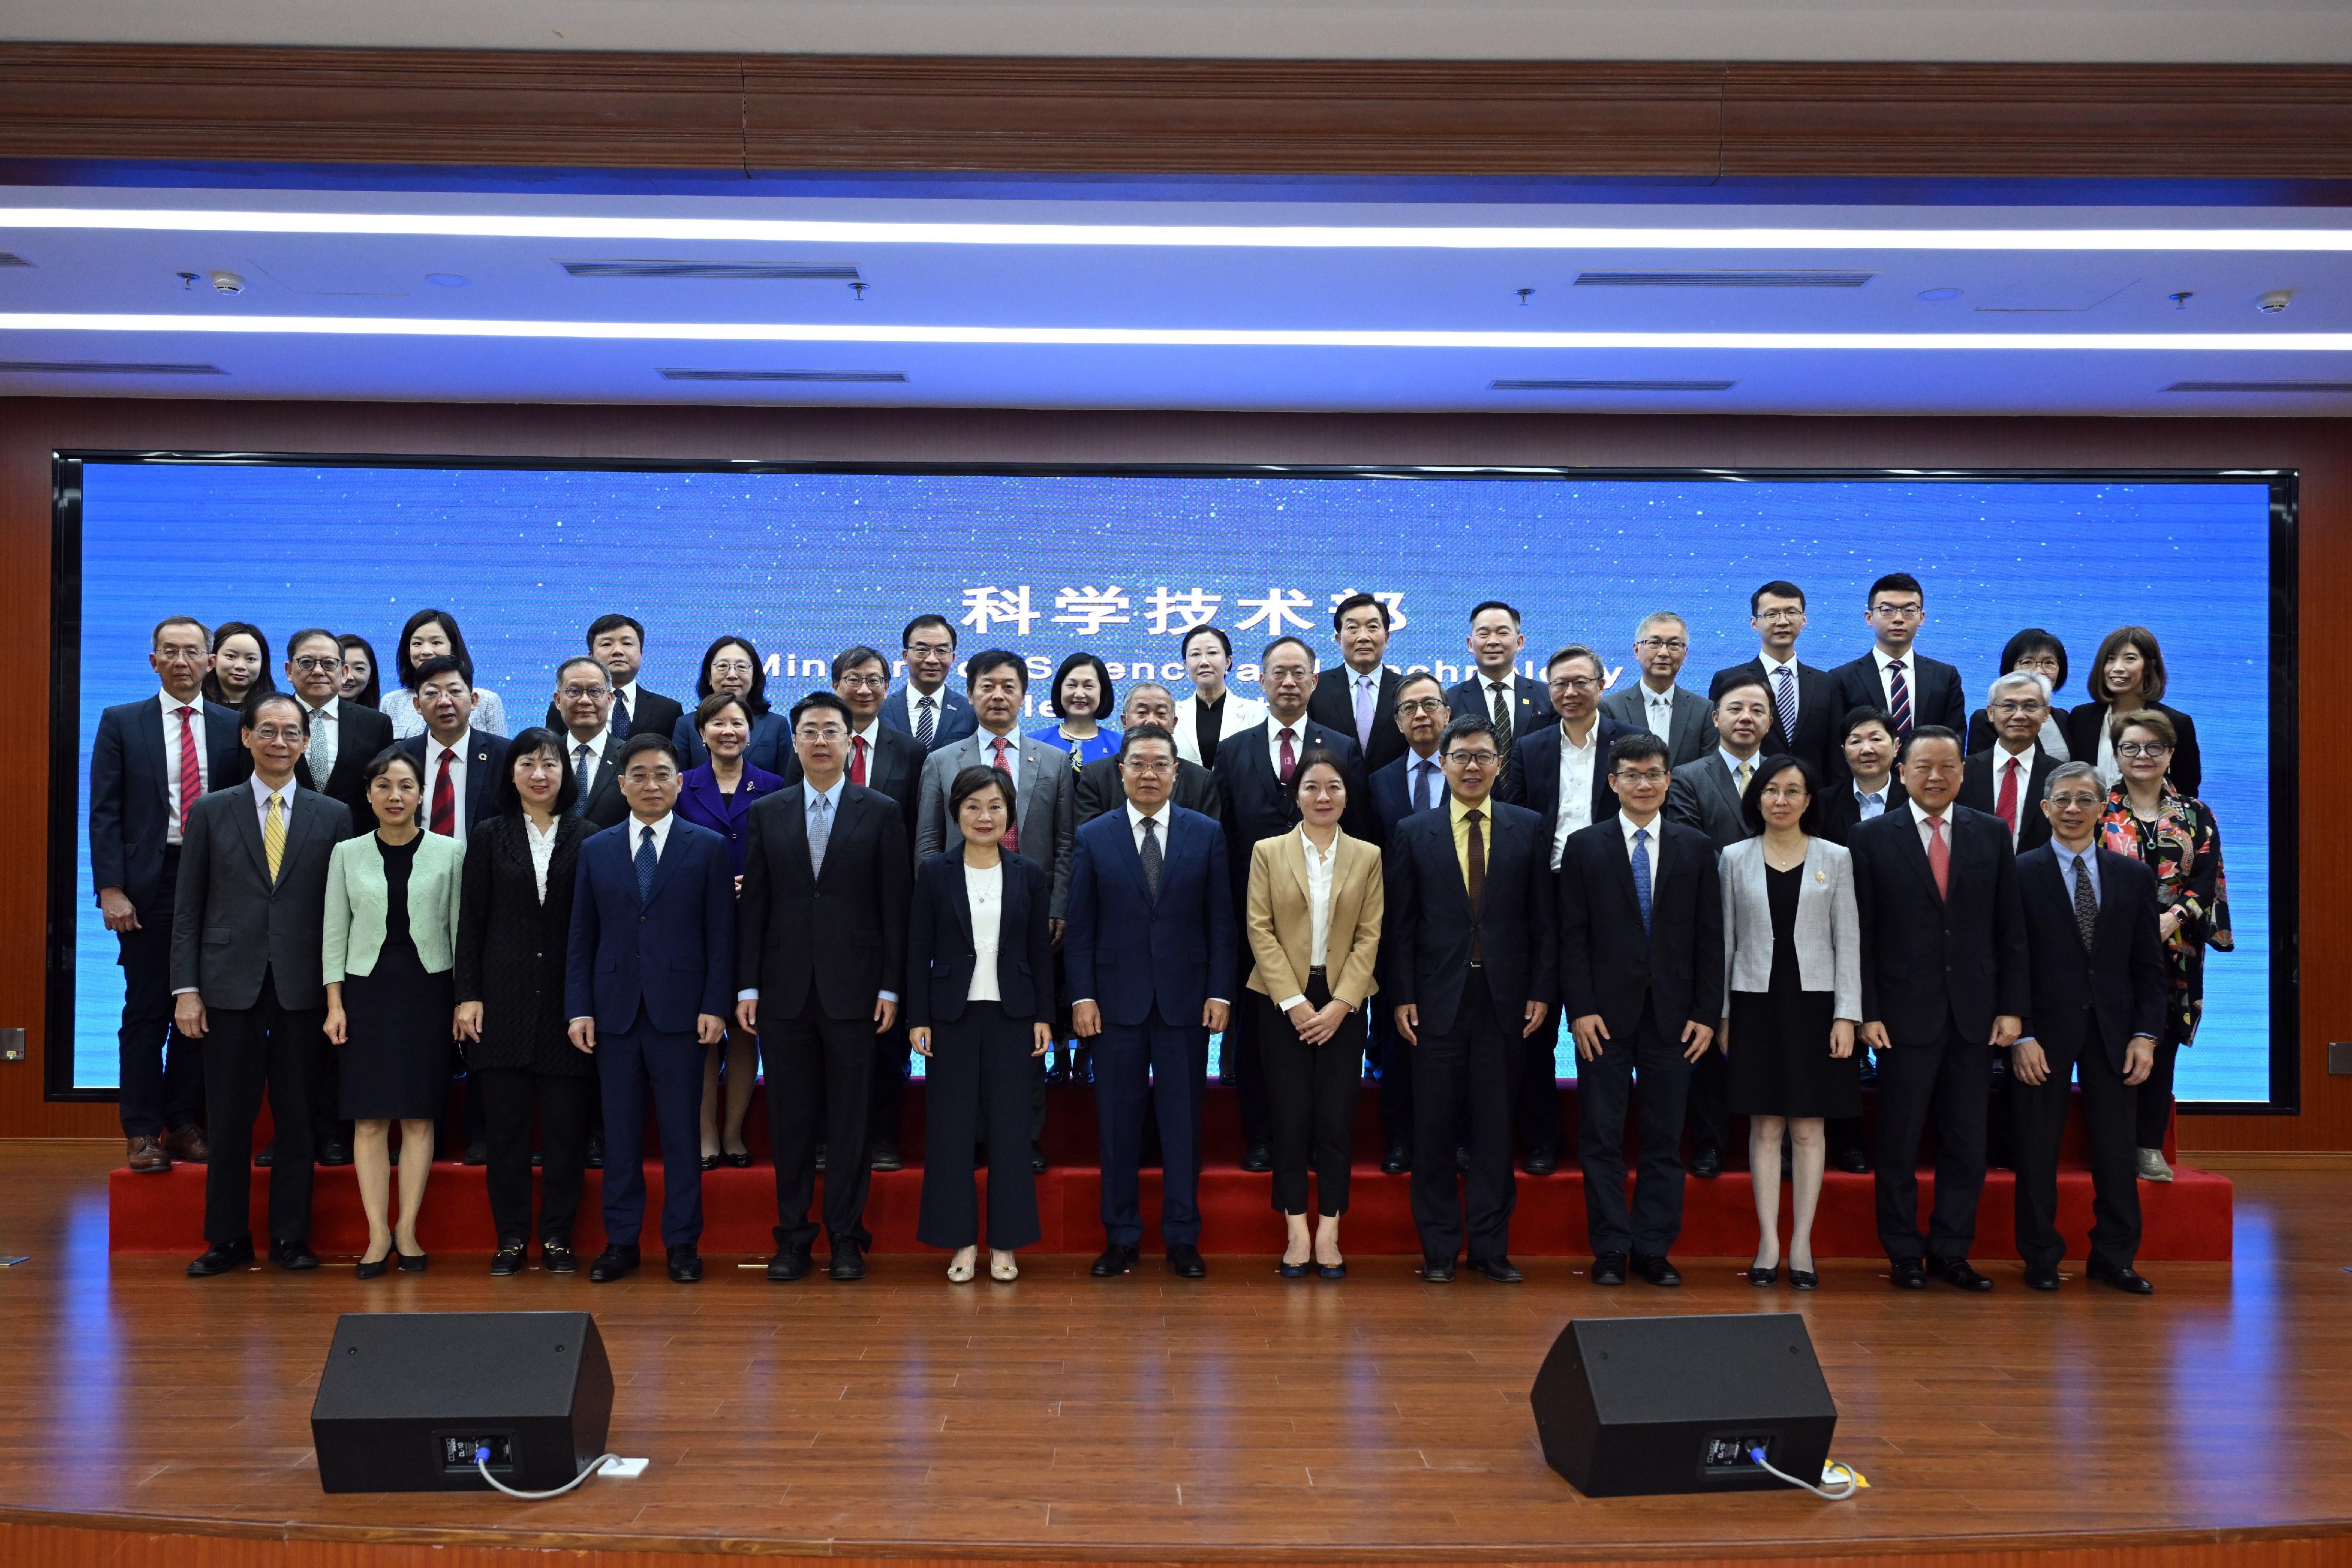 The Secretary for Education, Dr Choi Yuk-lin, today (May 10) continued to lead the delegation of Hong Kong higher education institutions to visit Beijing and called on the Ministry of Science and Technology. Photo shows Dr Choi (front row, sixth left), the Permanent Secretary for Education, Ms Michelle Li (front row, third left), and other members of the delegation with Vice Minister of Science and Technology Mr Chen Jiachang (front row, centre) and Deputy Director of the Liaison Office of the Central People's Government in the Hong Kong Special Administrative Region Ms Lu Xinning (front row, sixth right).